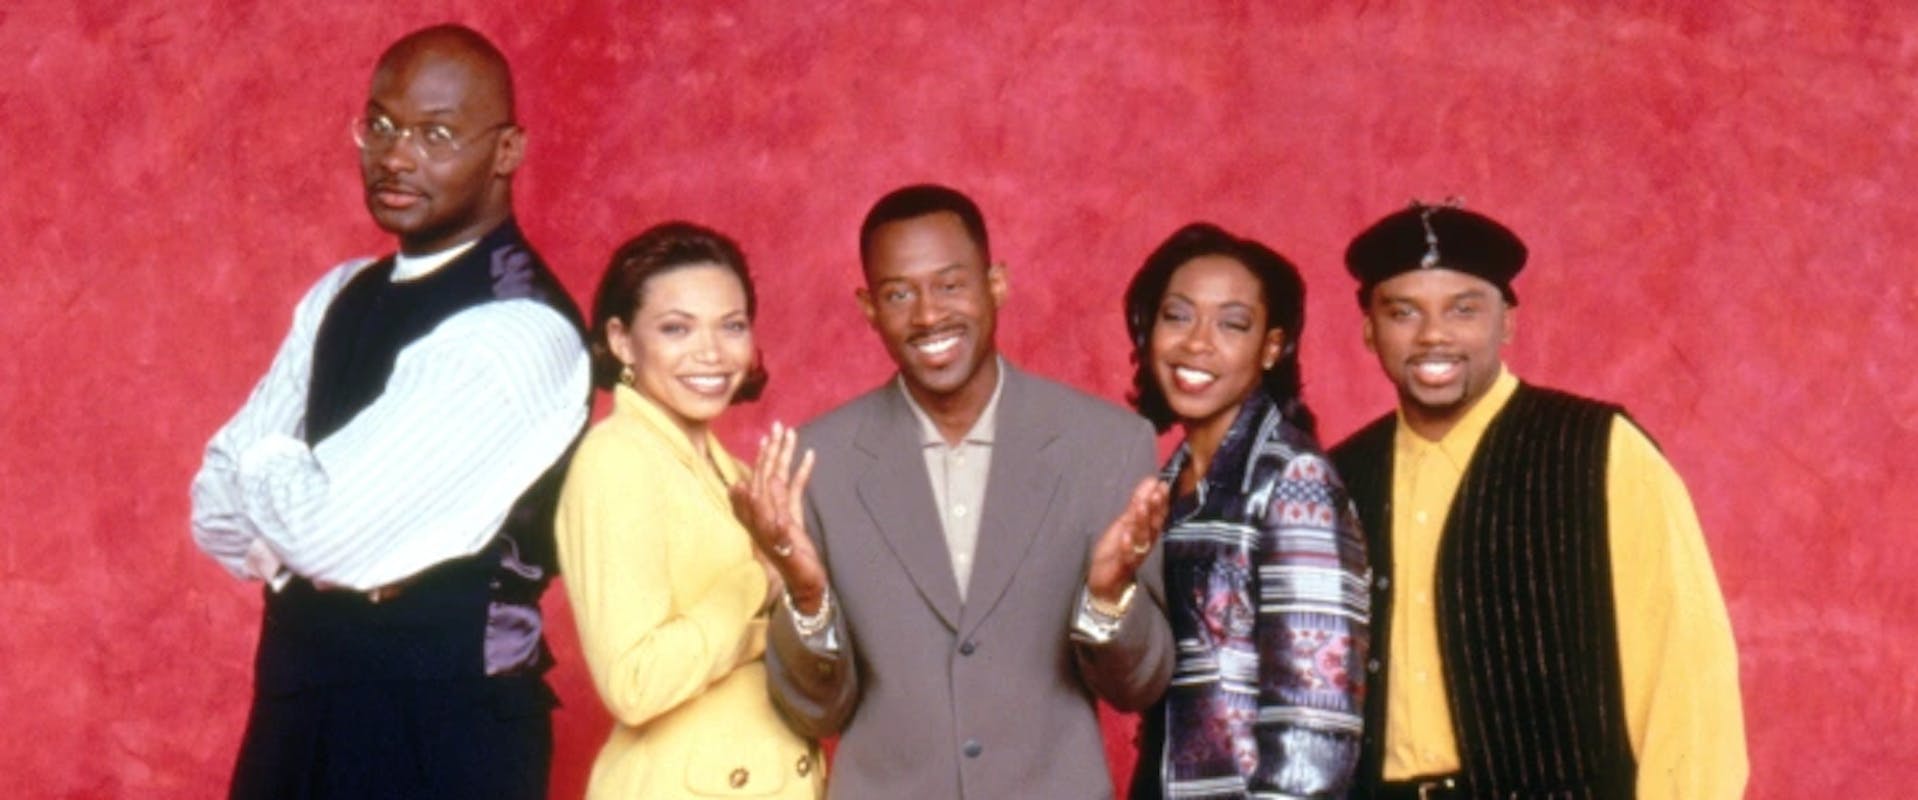 BET+ Announces 'Martin' Cast Reunion To Commemorate 30 Year Anniversary